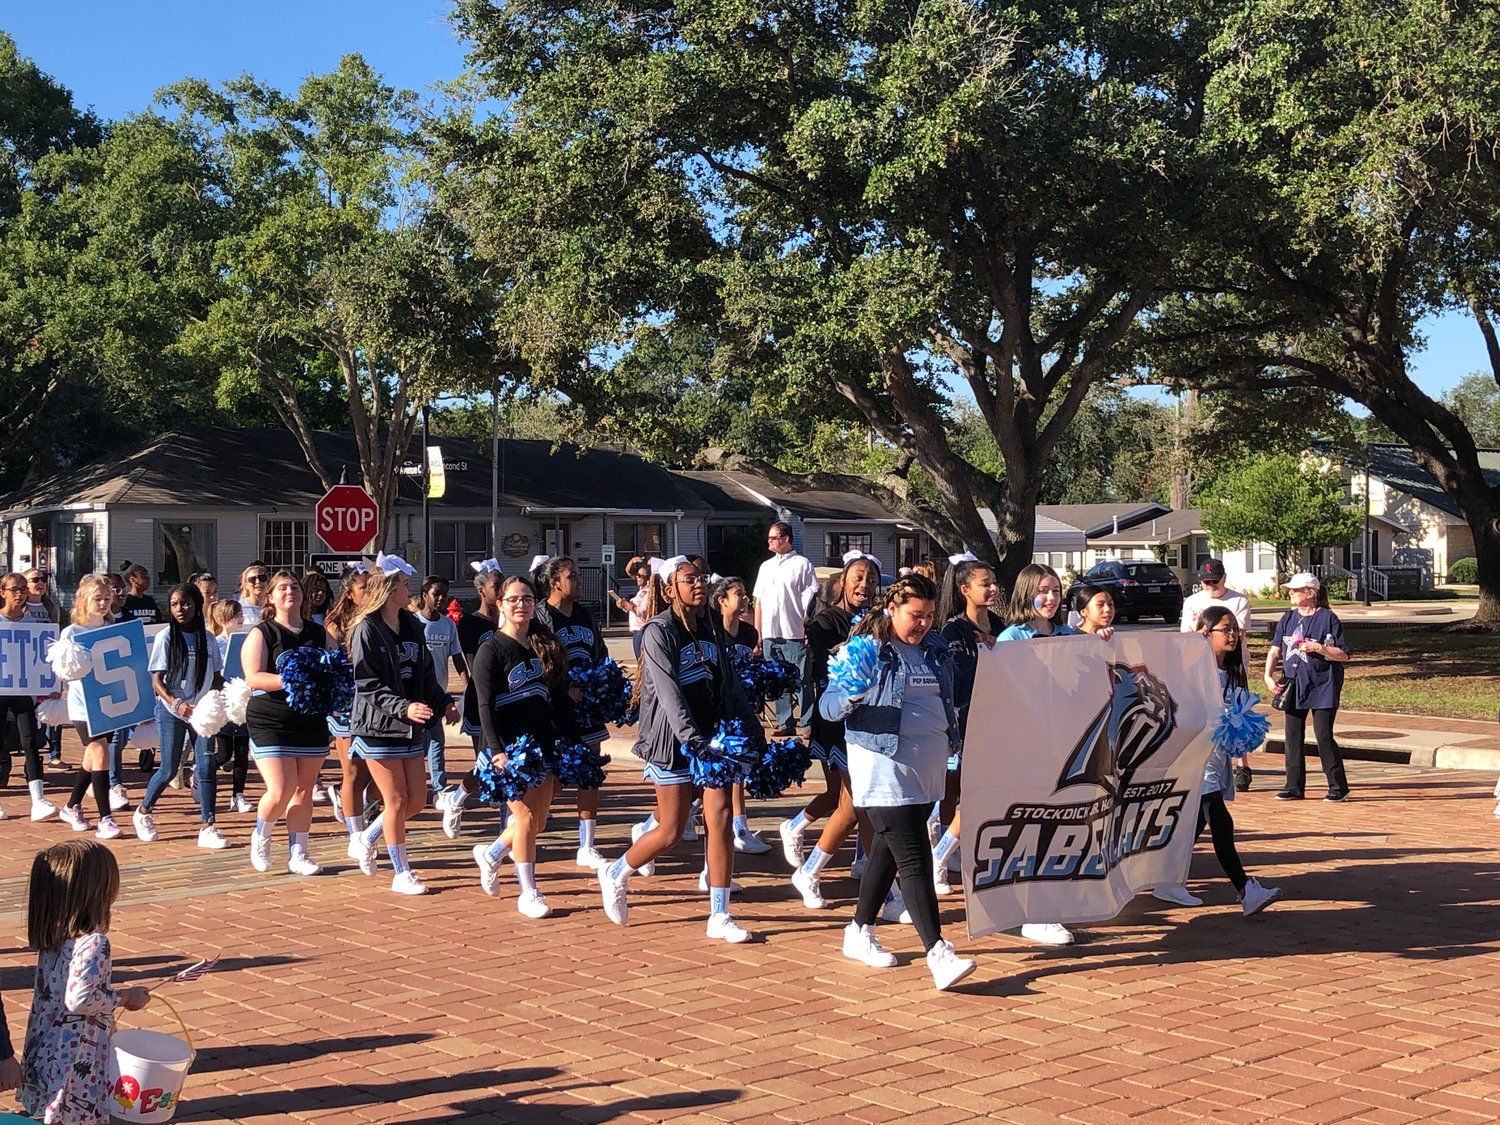 The Stockdick Junior High cheerleaders march during the parade.